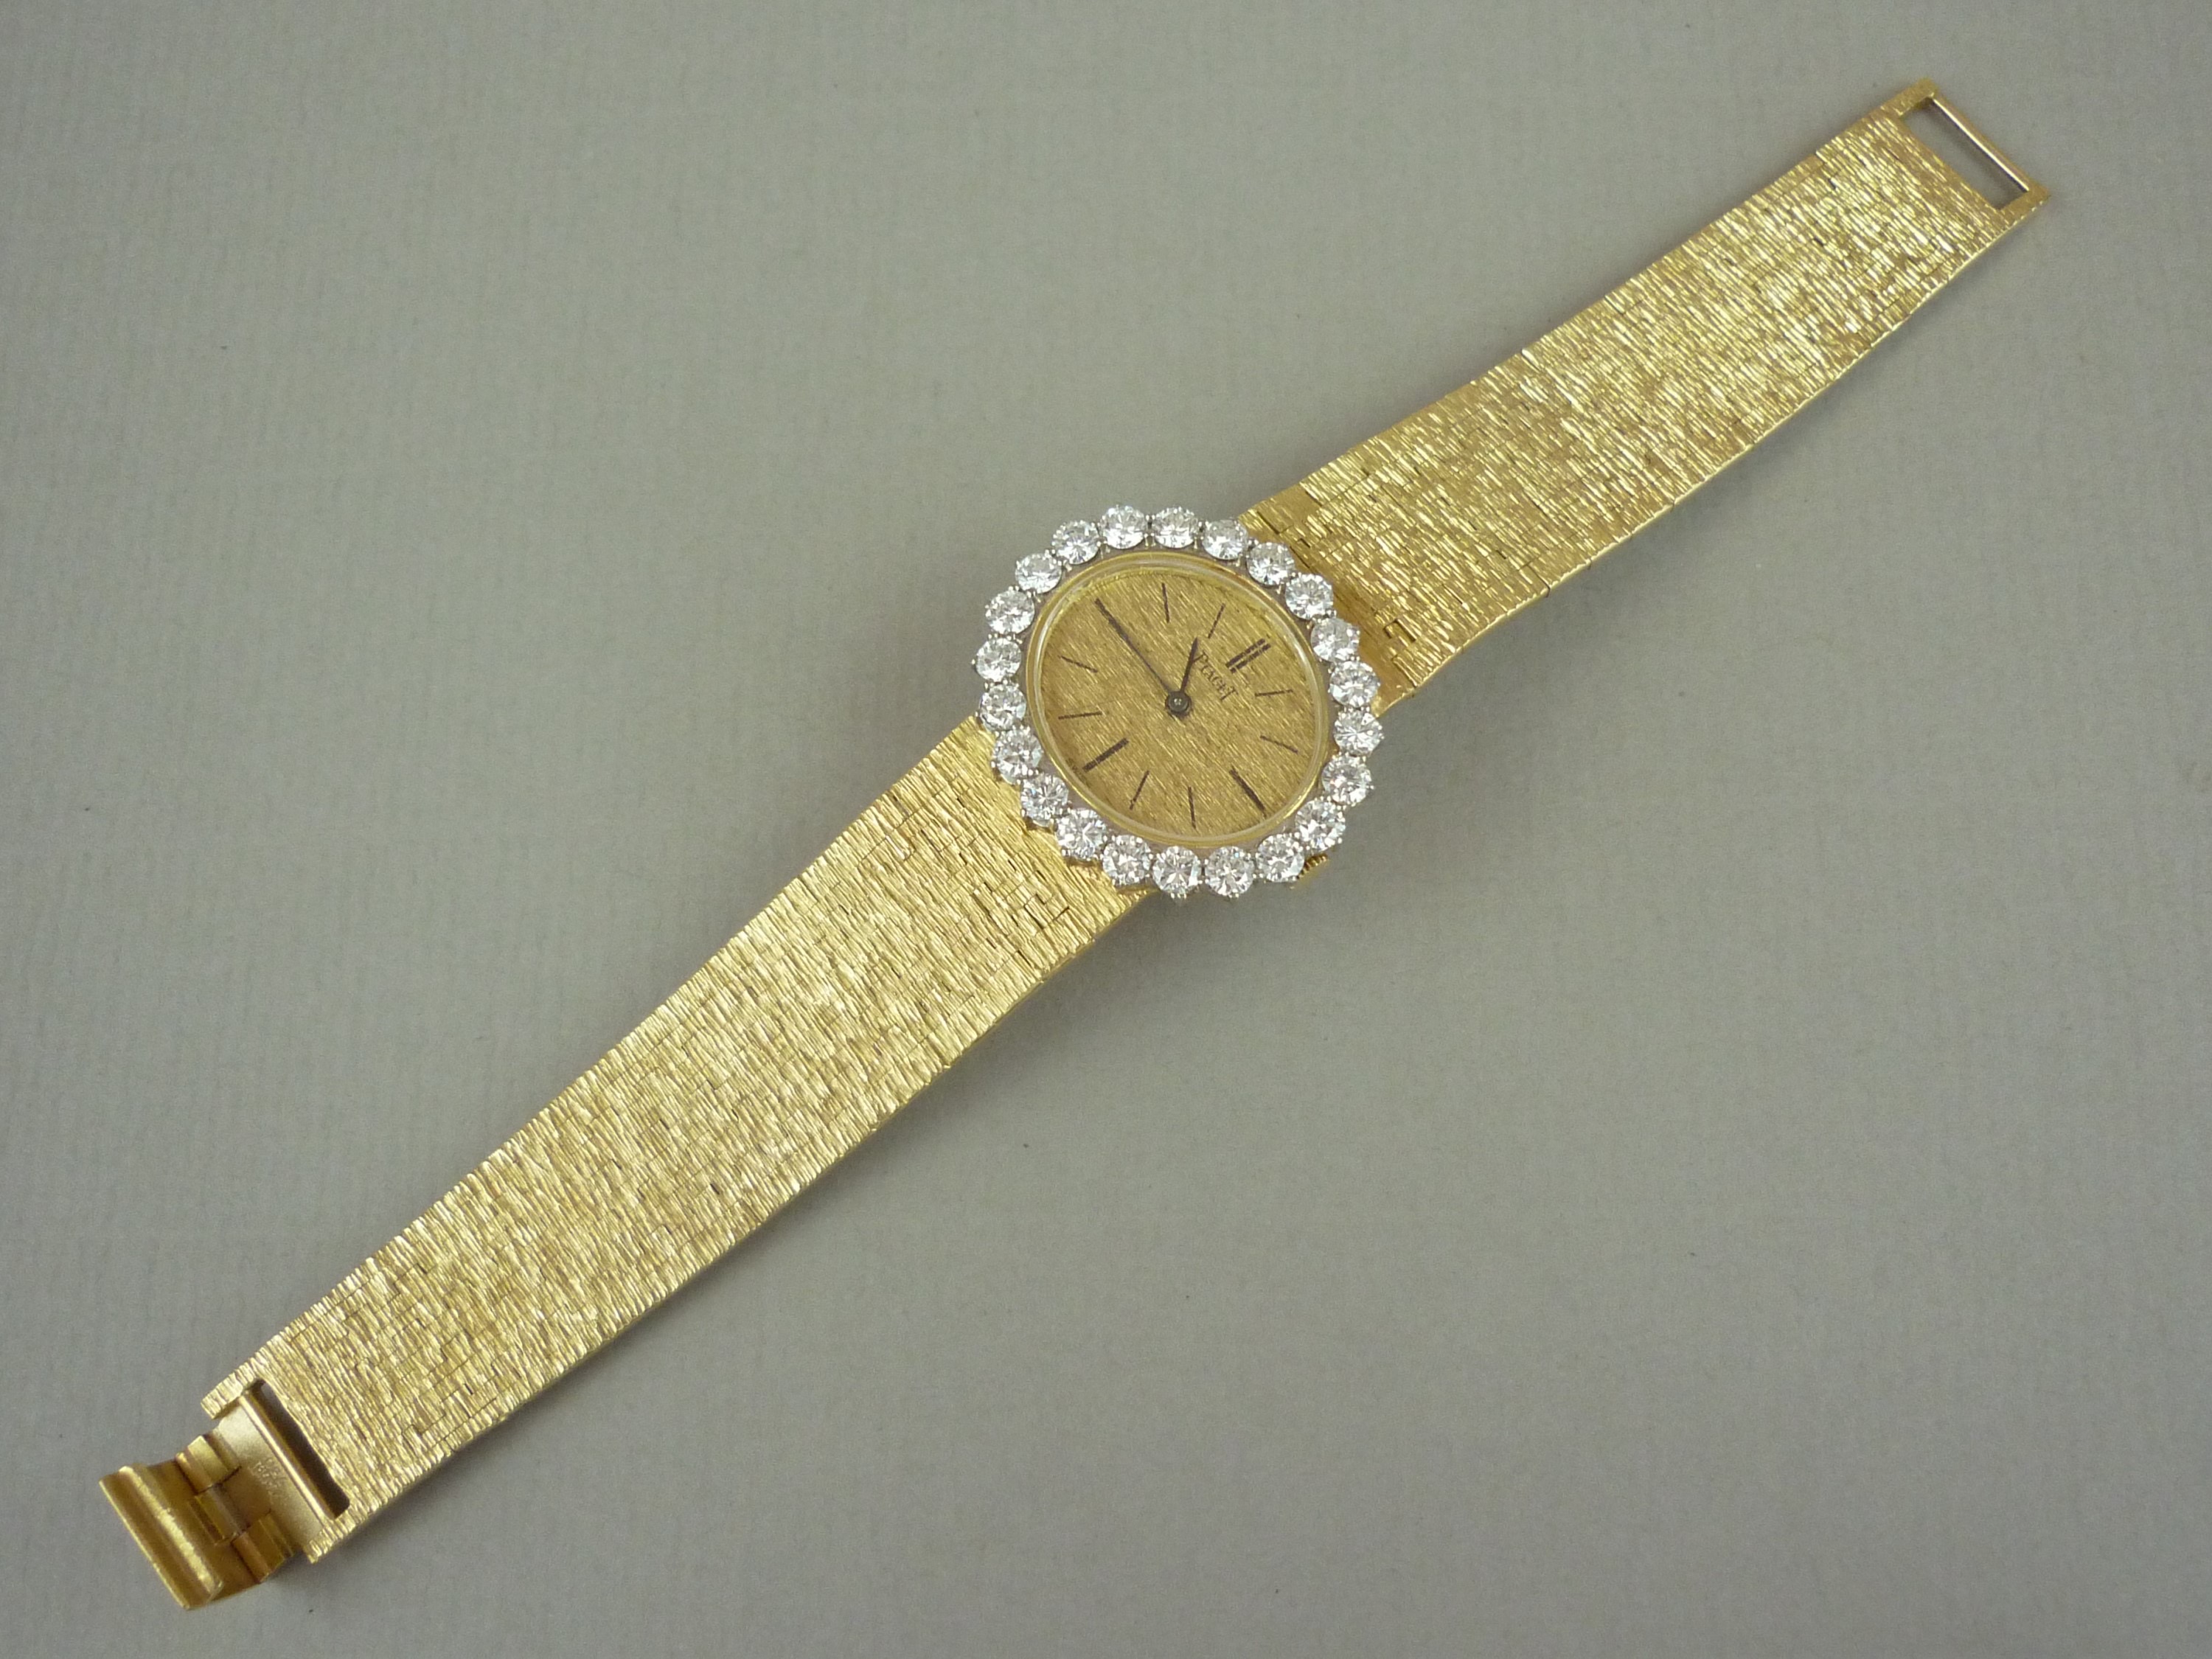 A Piaget 18ct gold and diamond cocktail watch, having crown wound movement, textured oval face - Image 3 of 3